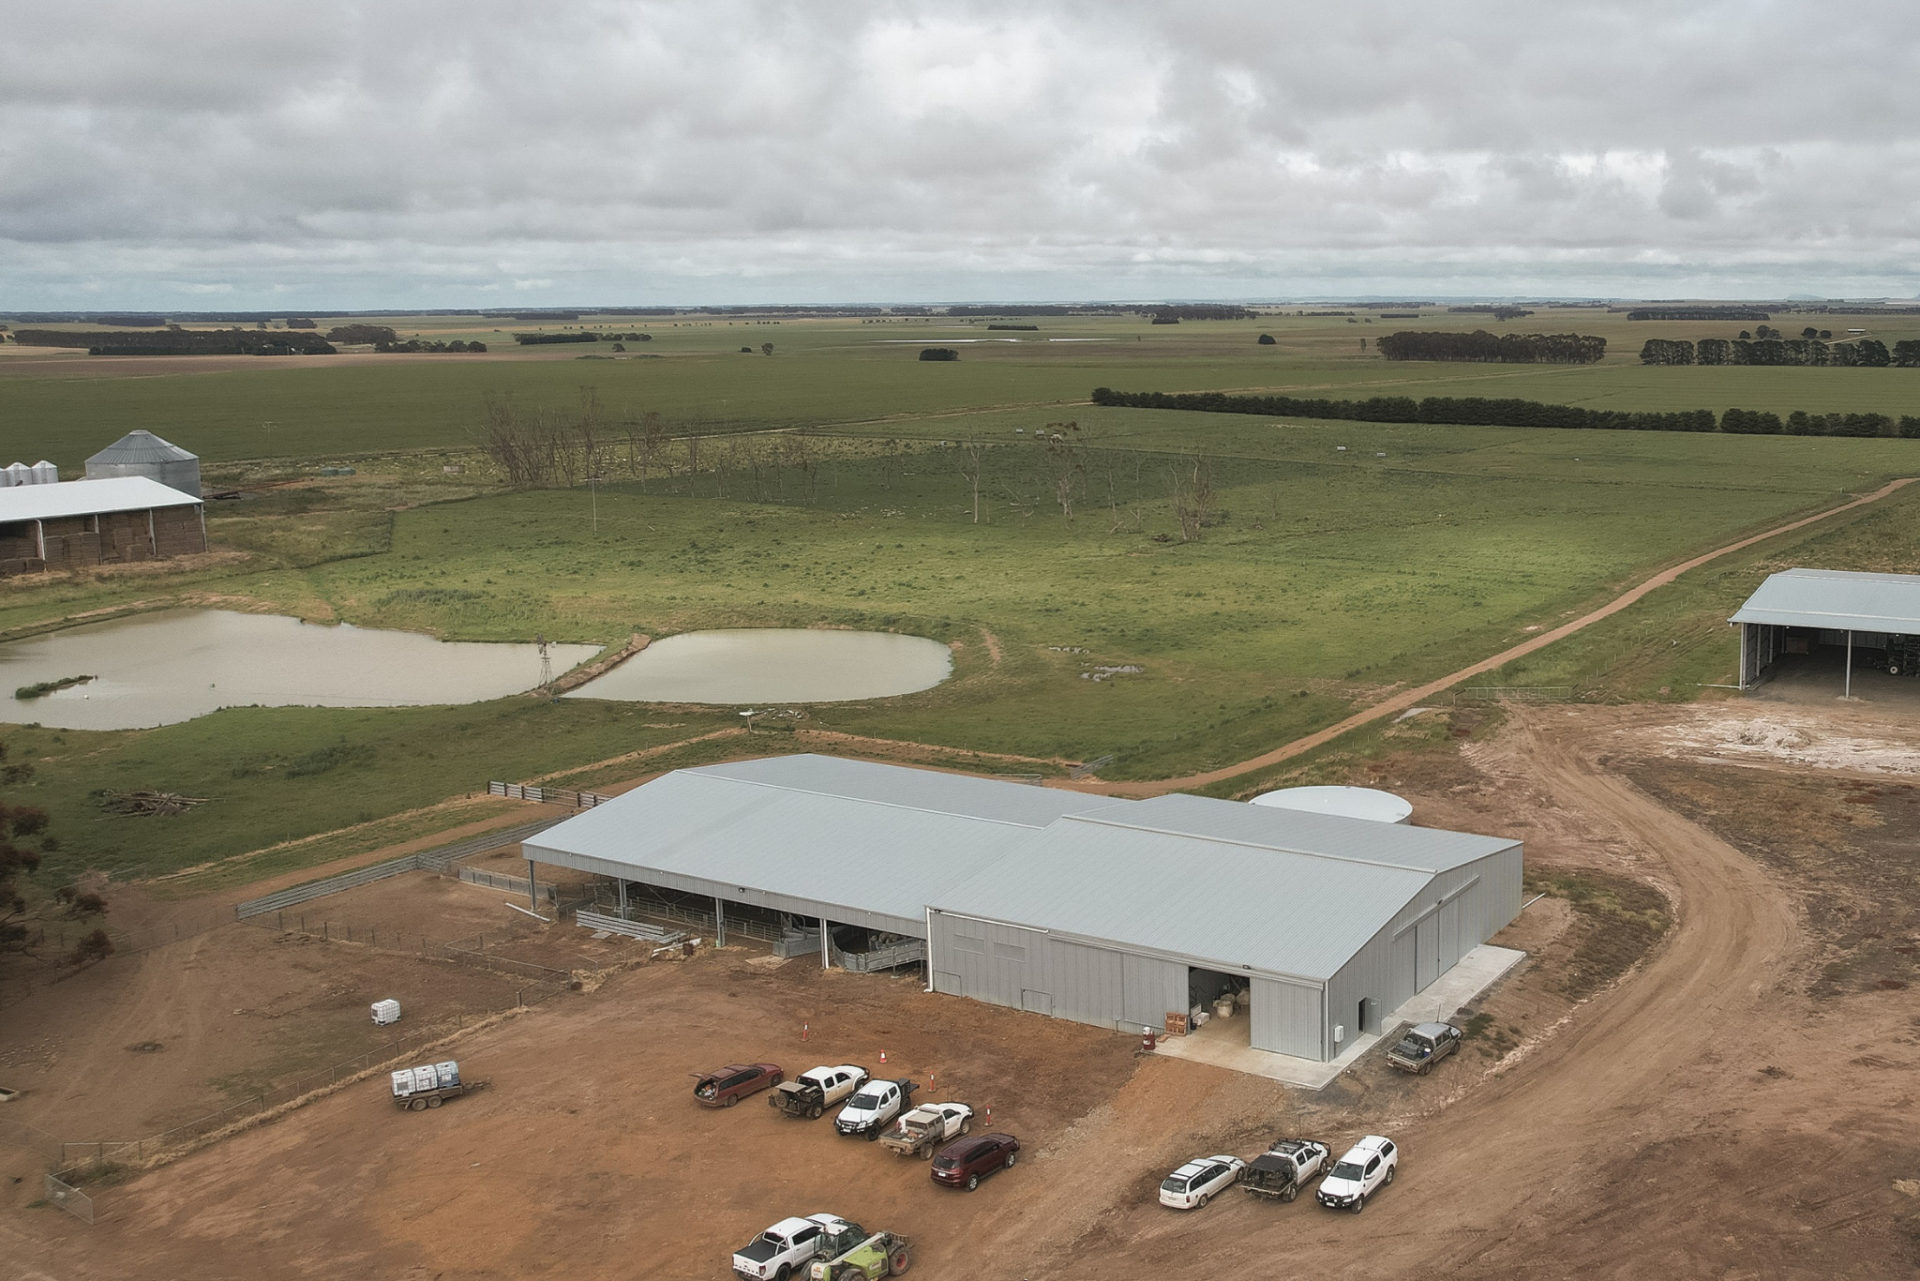 Shearing Shed and Yard cover Complex